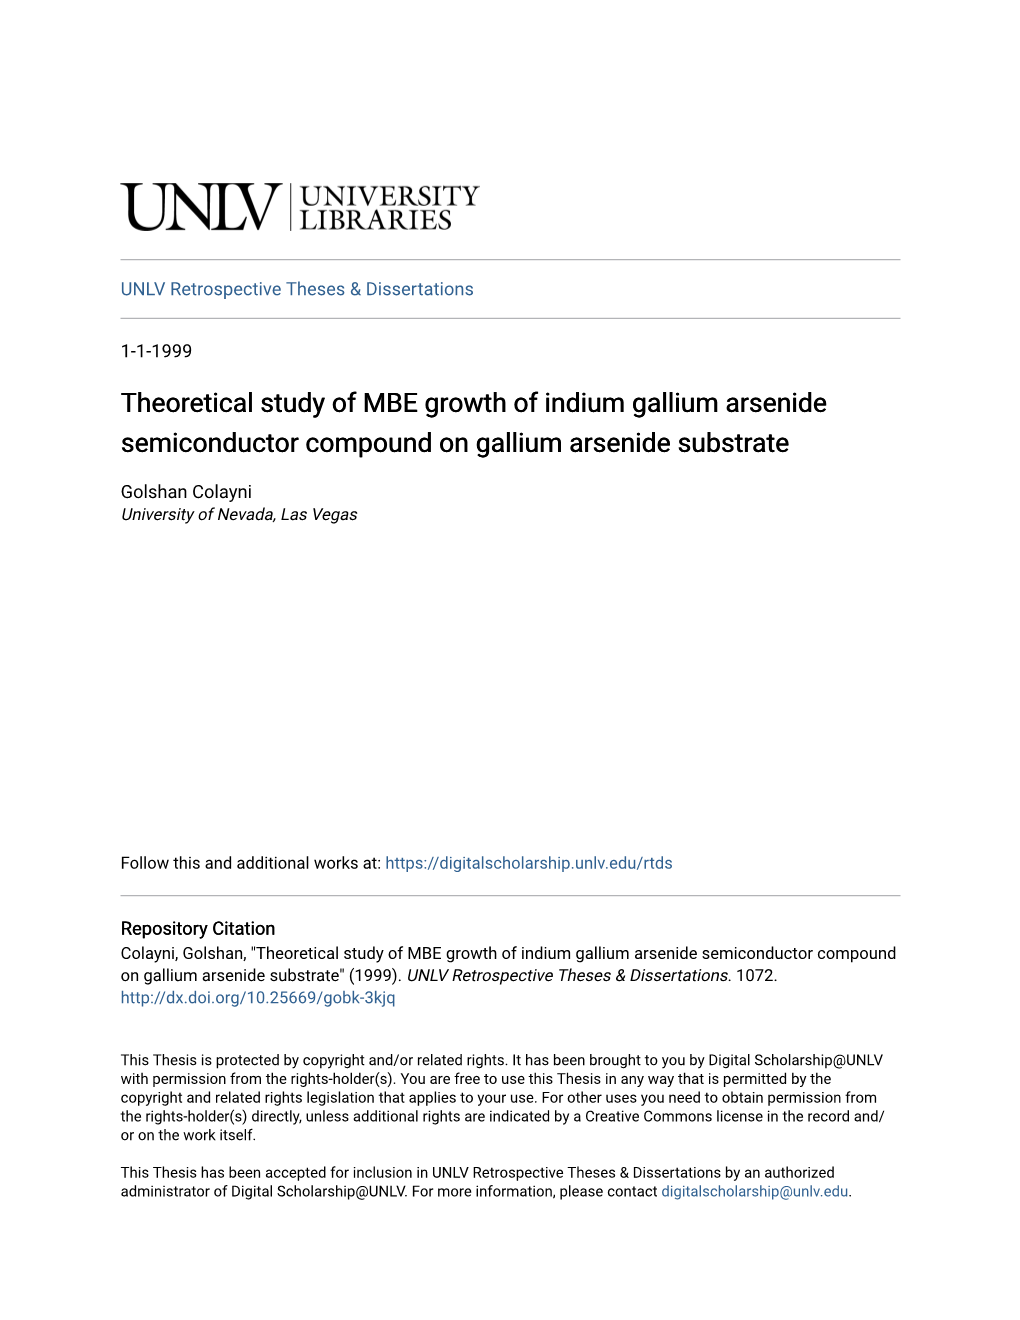 Theoretical Study of MBE Growth of Indium Gallium Arsenide Semiconductor Compound on Gallium Arsenide Substrate